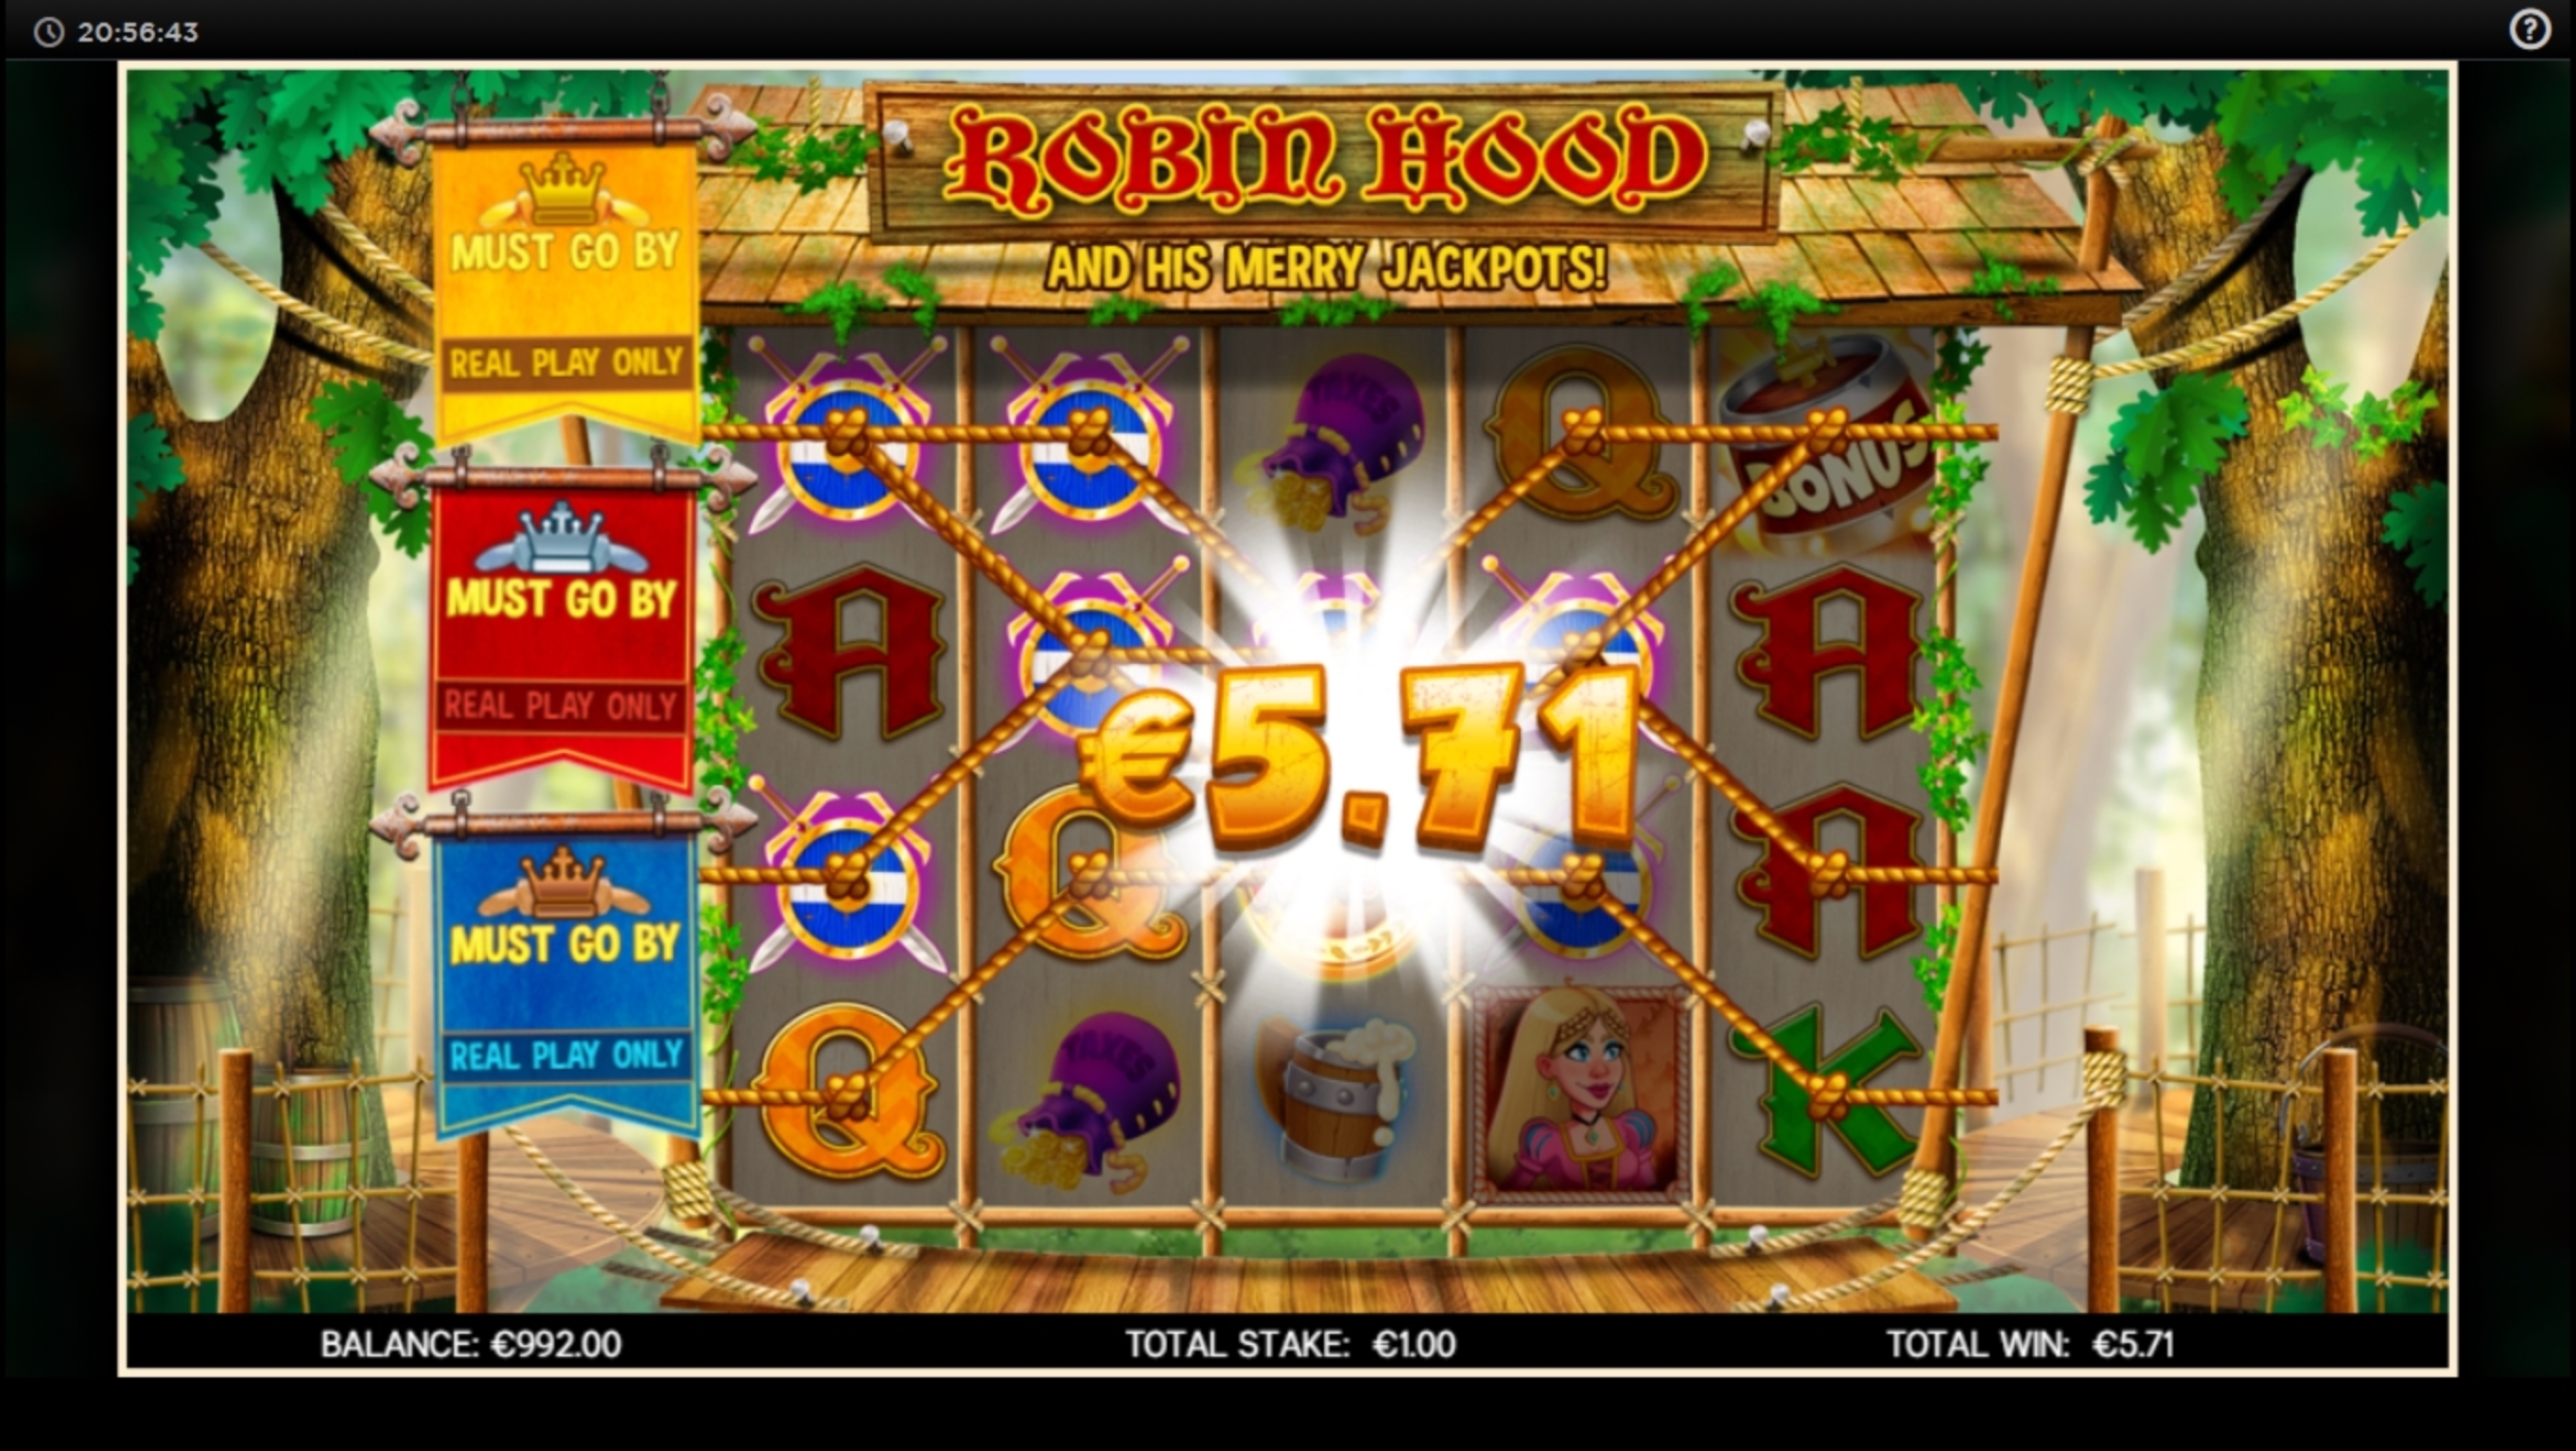 Win Money in Robin Hood Free Slot Game by CORE Gaming